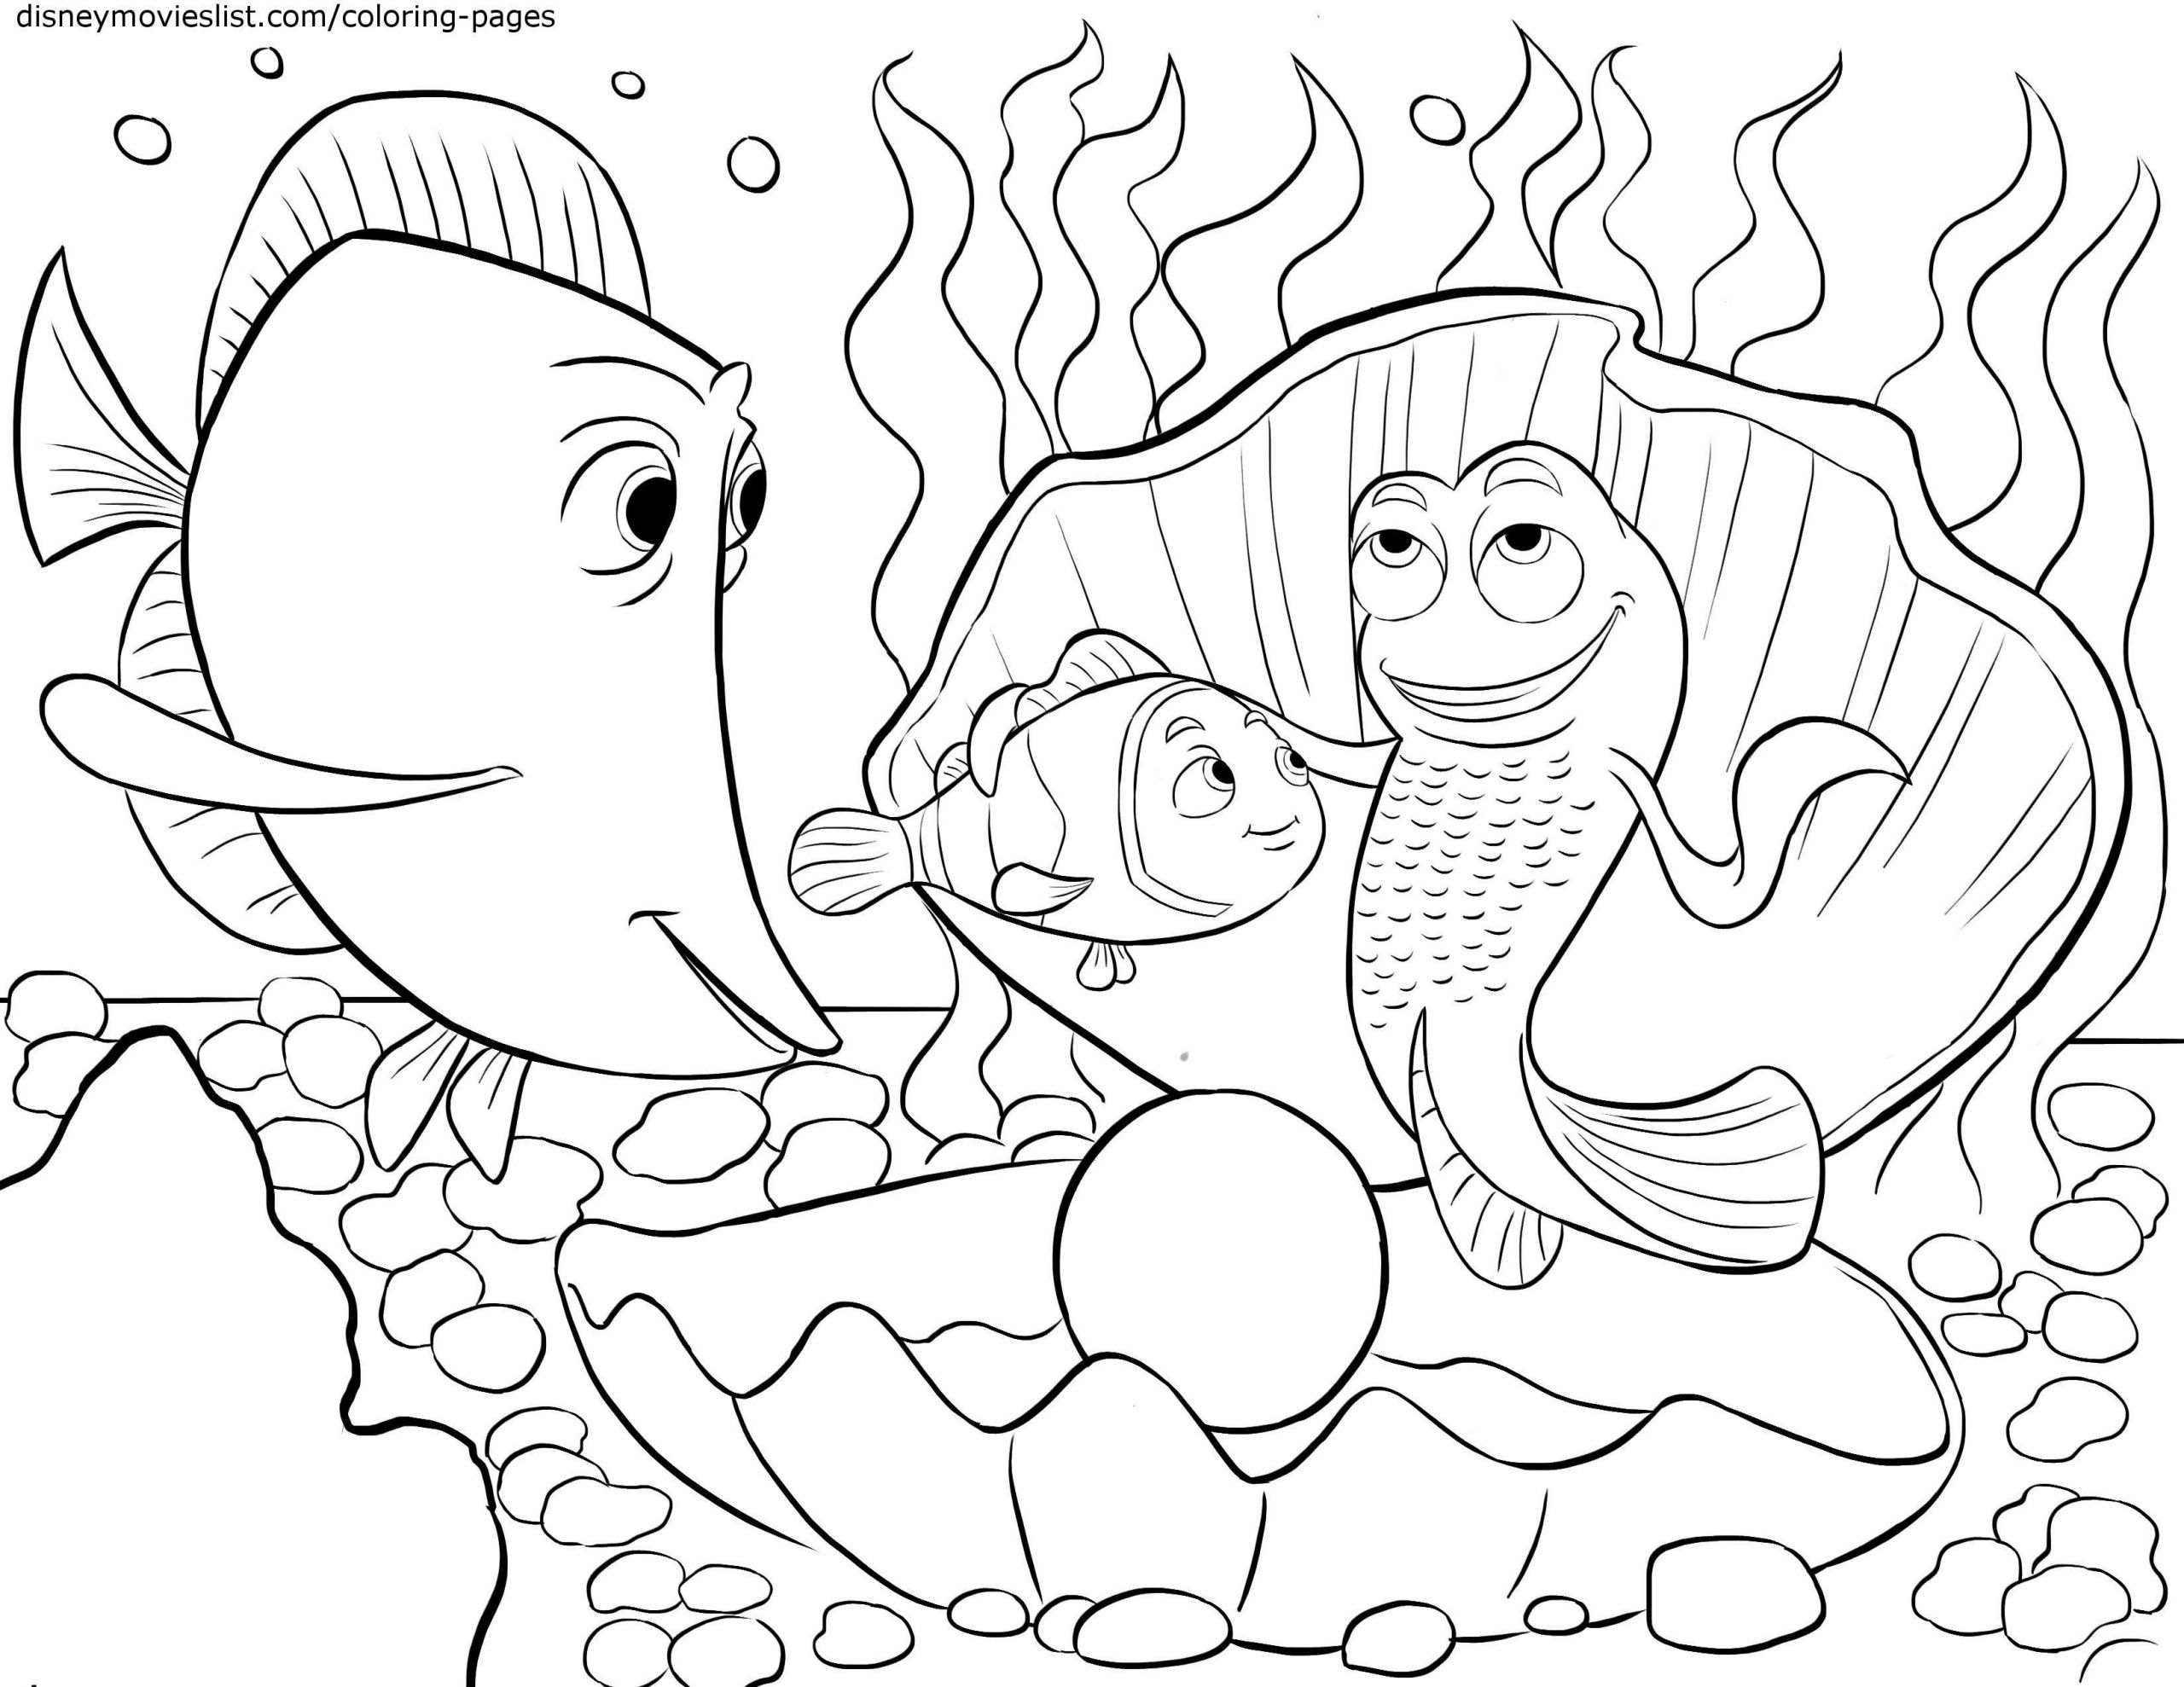 Kids Coloring Pages Pdf
 Coloring Pages Marvellous Coloring Pages For Kids Pdf